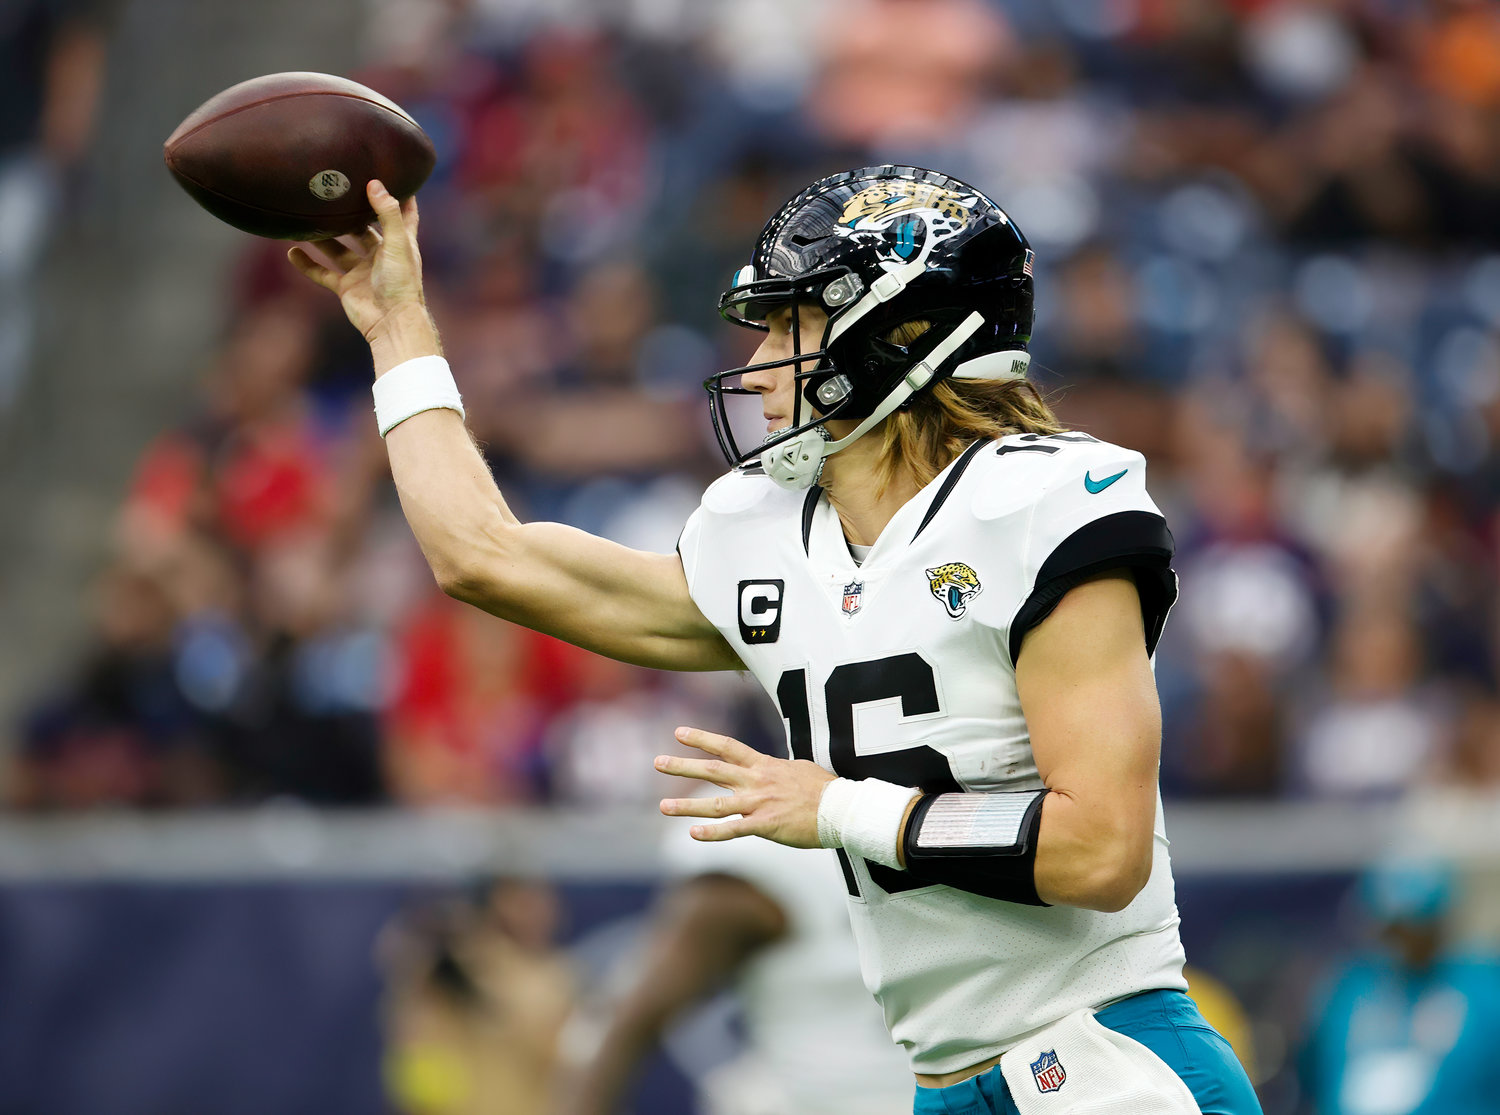 Jaguars quarterback Trevor Lawrence (16) passes the ball during an NFL game between the Houston Texans and the Jacksonville Jaguars on Jan. 1, 2023 in Houston. The Jaguars won, 31-3.